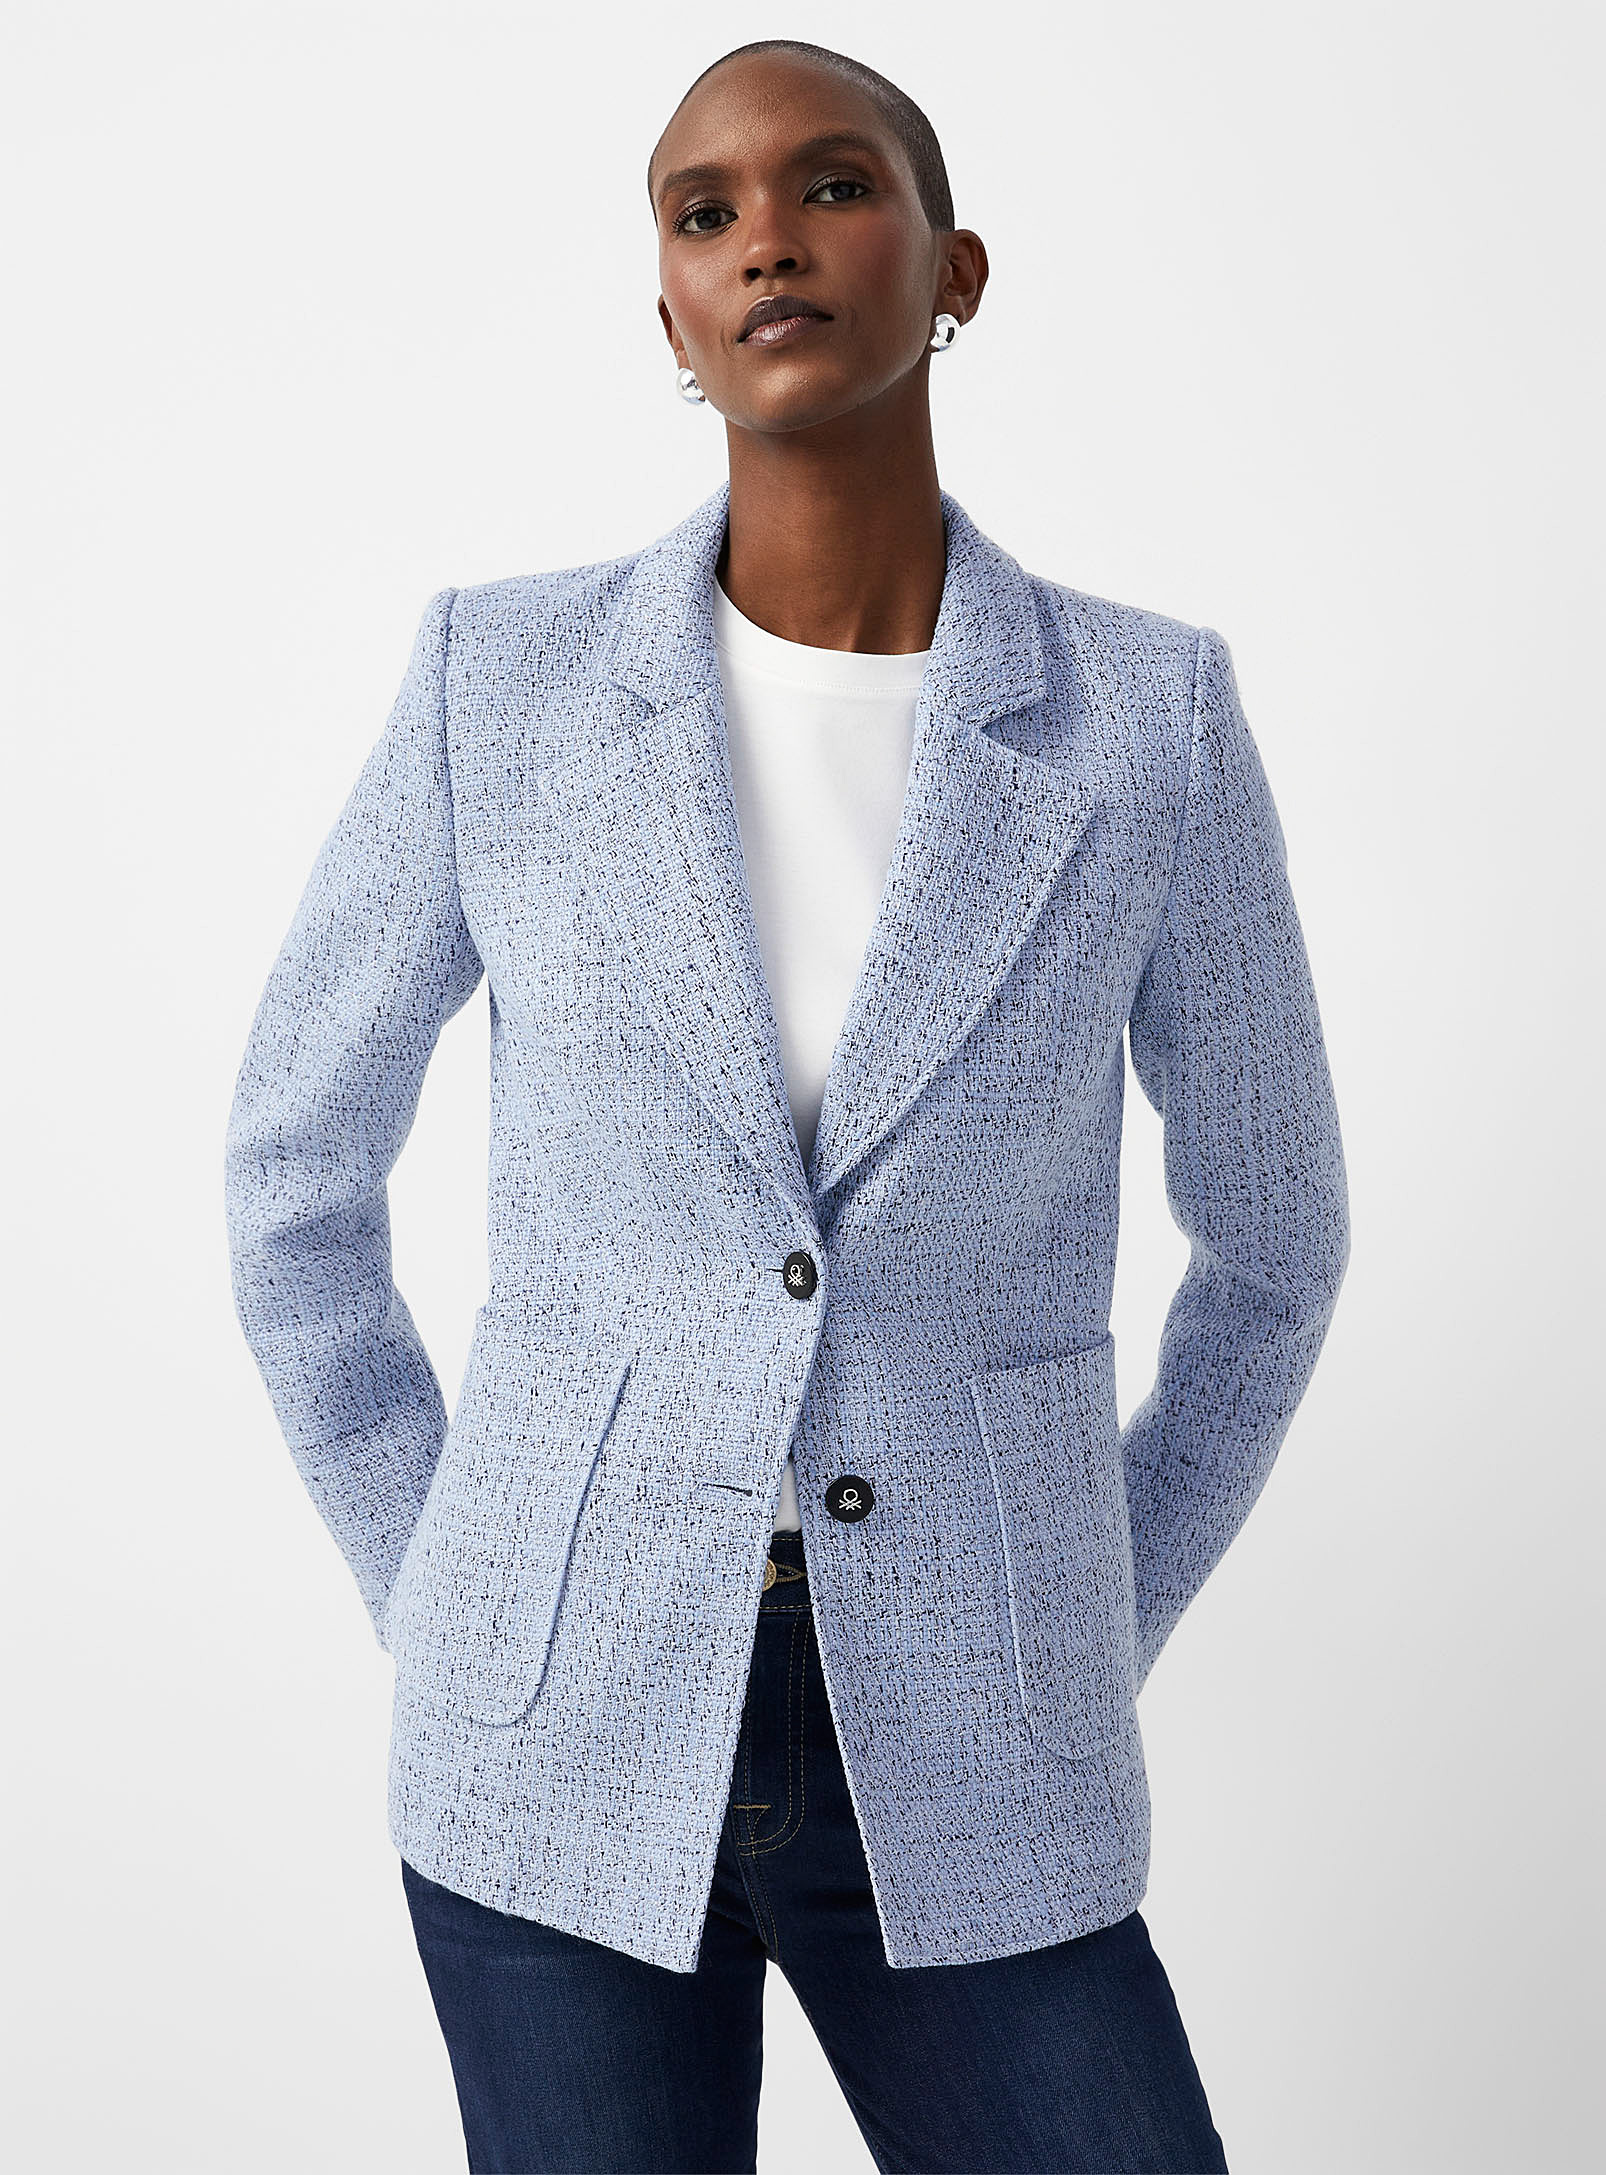 United Colors Of Benetton Patch Pockets Powder Blue Tweed Blazer In Patterned Blue